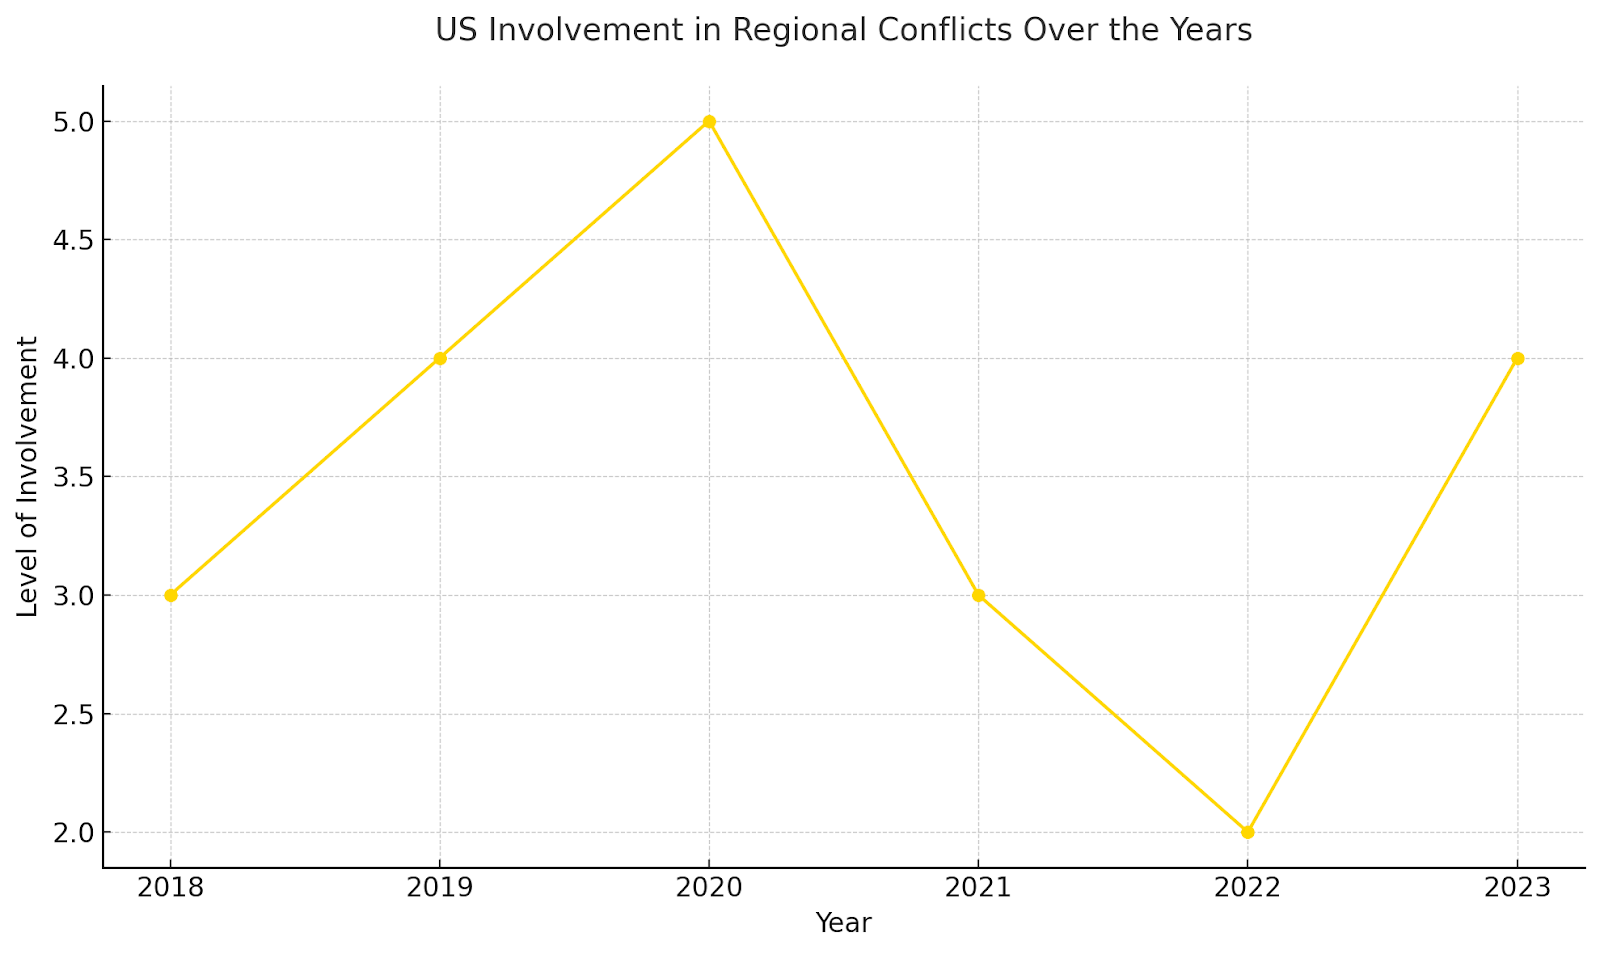 The chart visualizes the evolution of U.S. involvement in regional conflicts over the last few years, highlighting variations in engagement levels. 